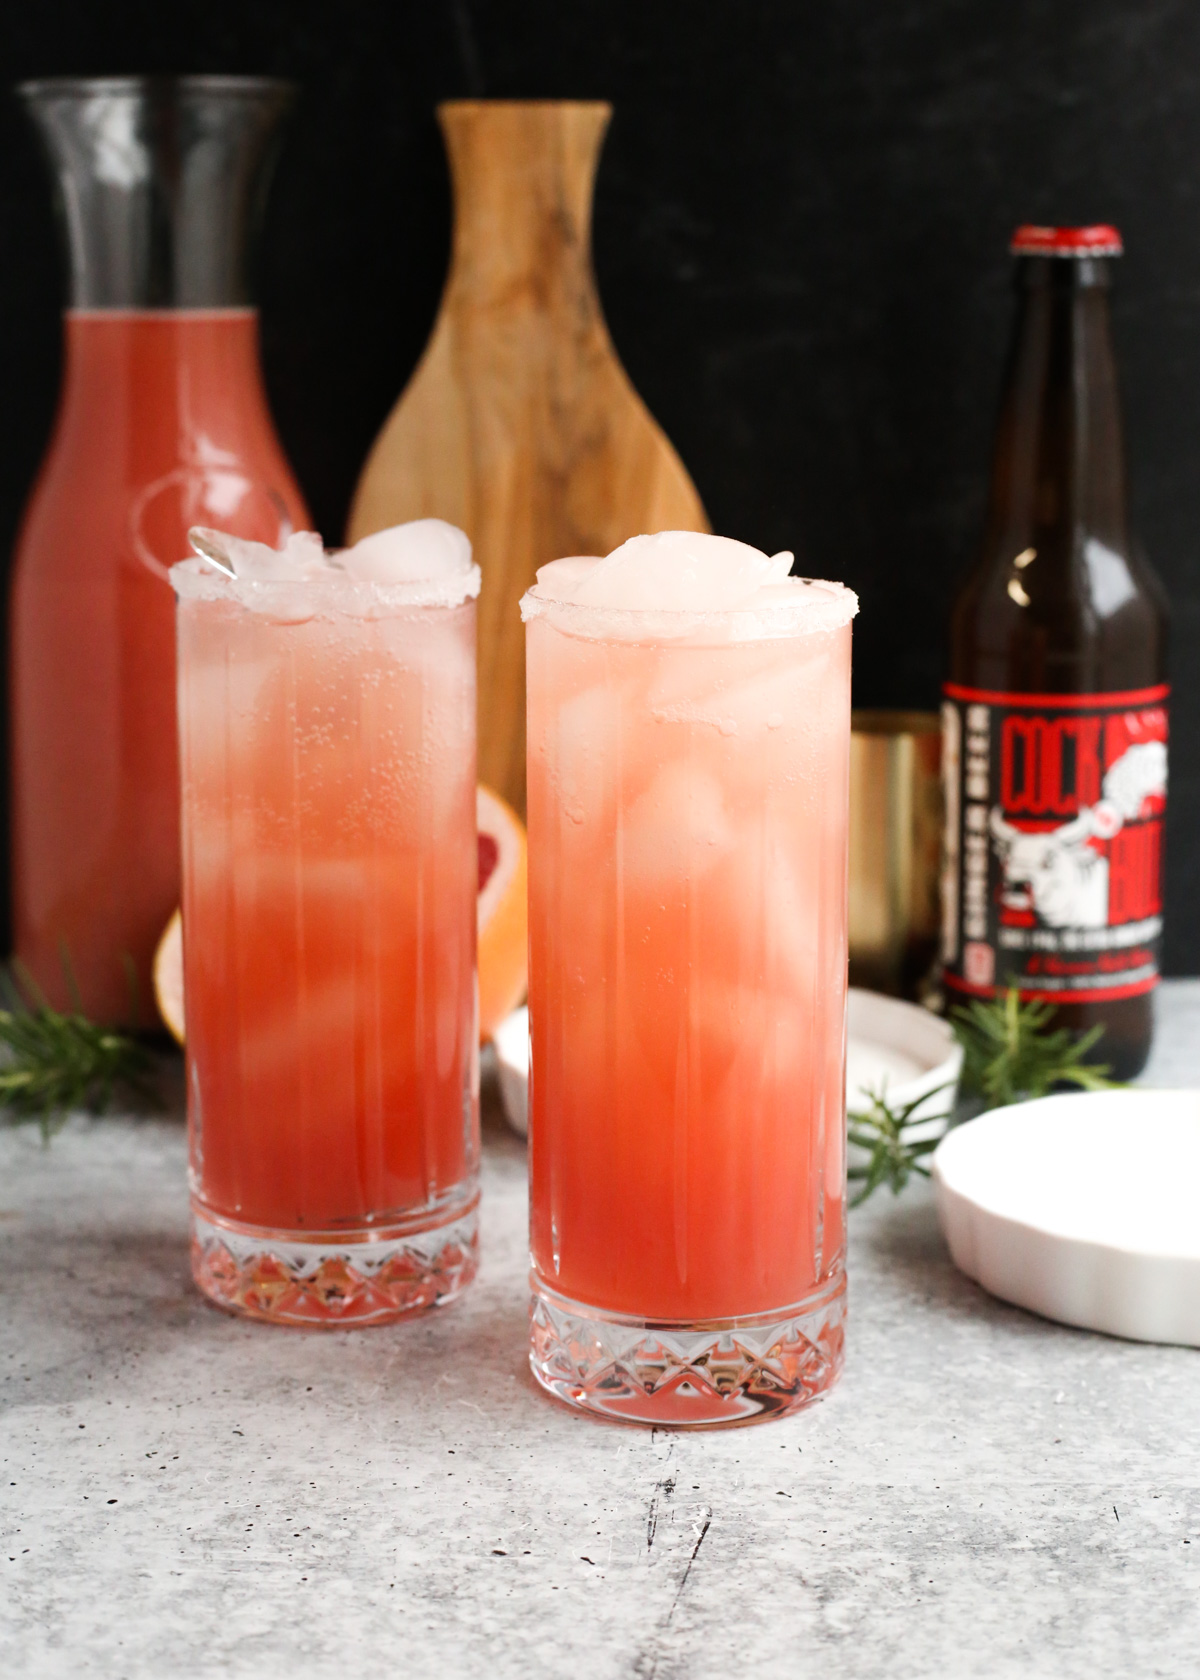 Two ginger beer paloma cocktails are served on a kitchen countertop, filled to the top of tall glasses with crushed ice and the garnishes visible in the background